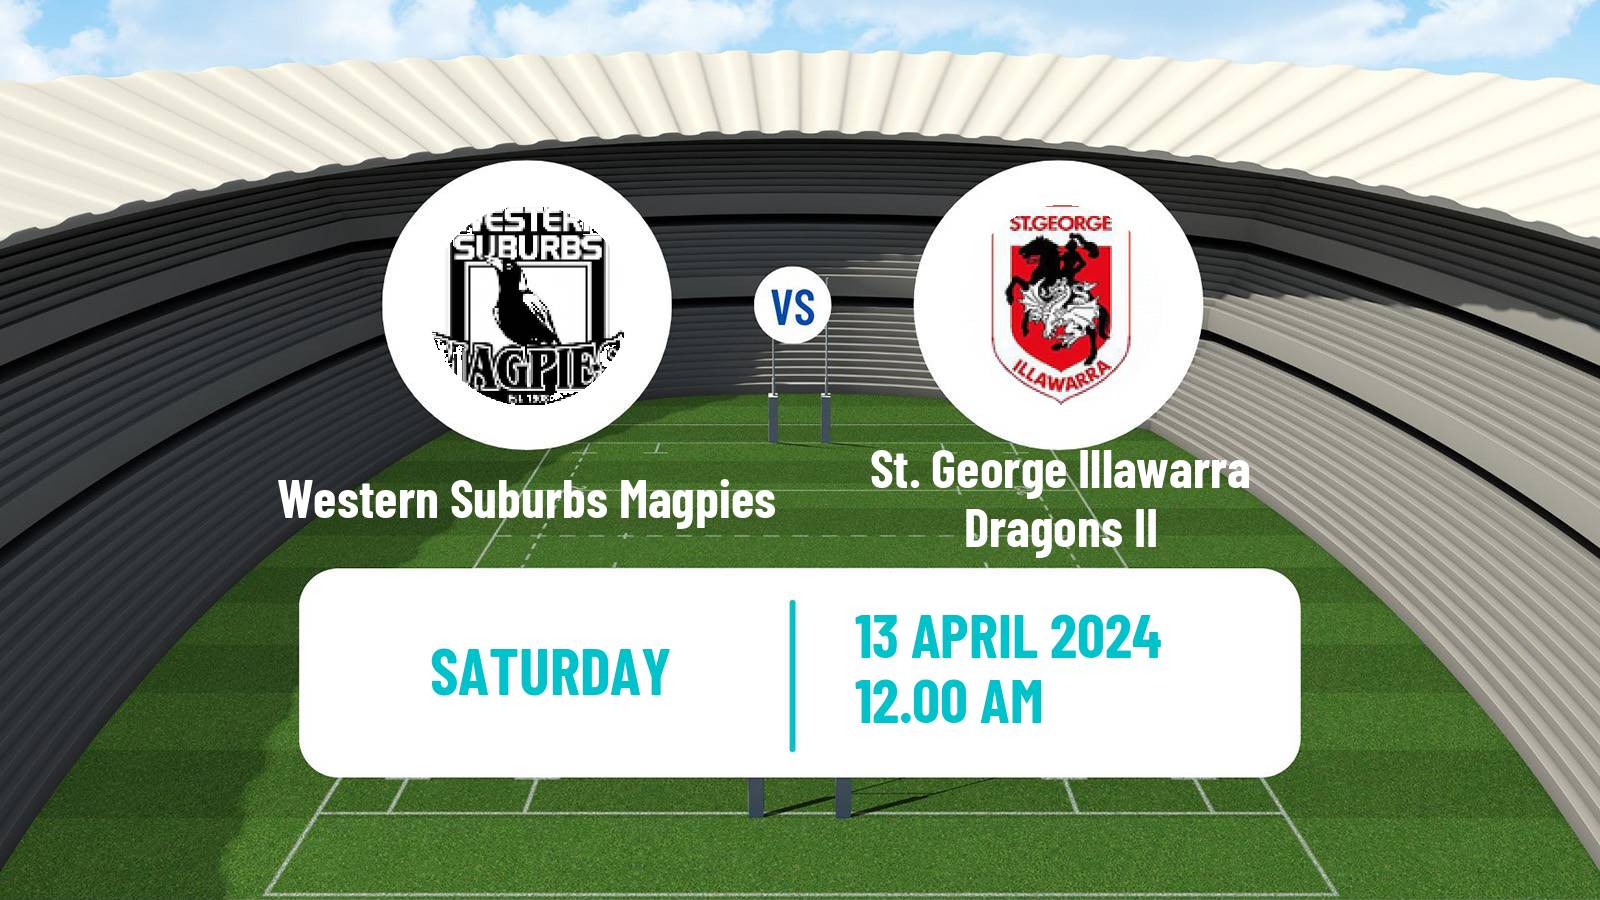 Rugby league Australian NSW Cup Western Suburbs Magpies - St. George Illawarra Dragons II